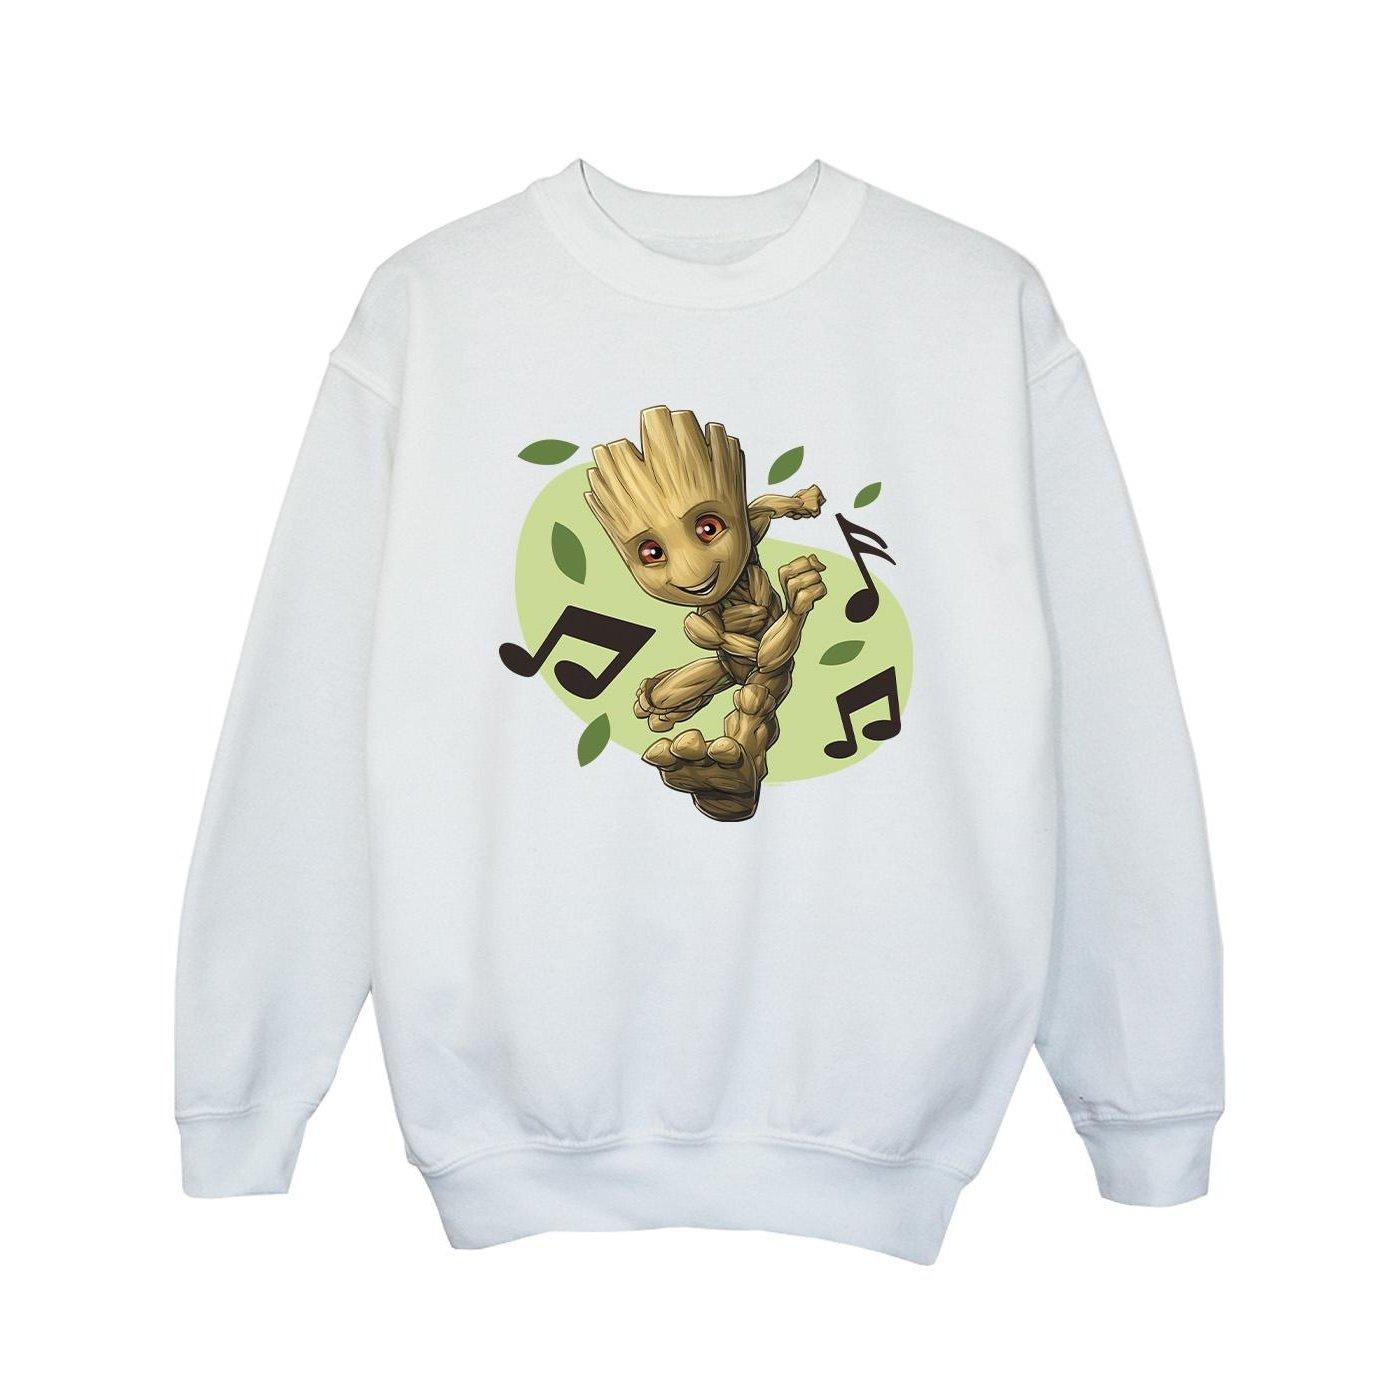 Guardians Of The Galaxy Groot Musical Notes Sweatshirt Unisex Weiss 152-158